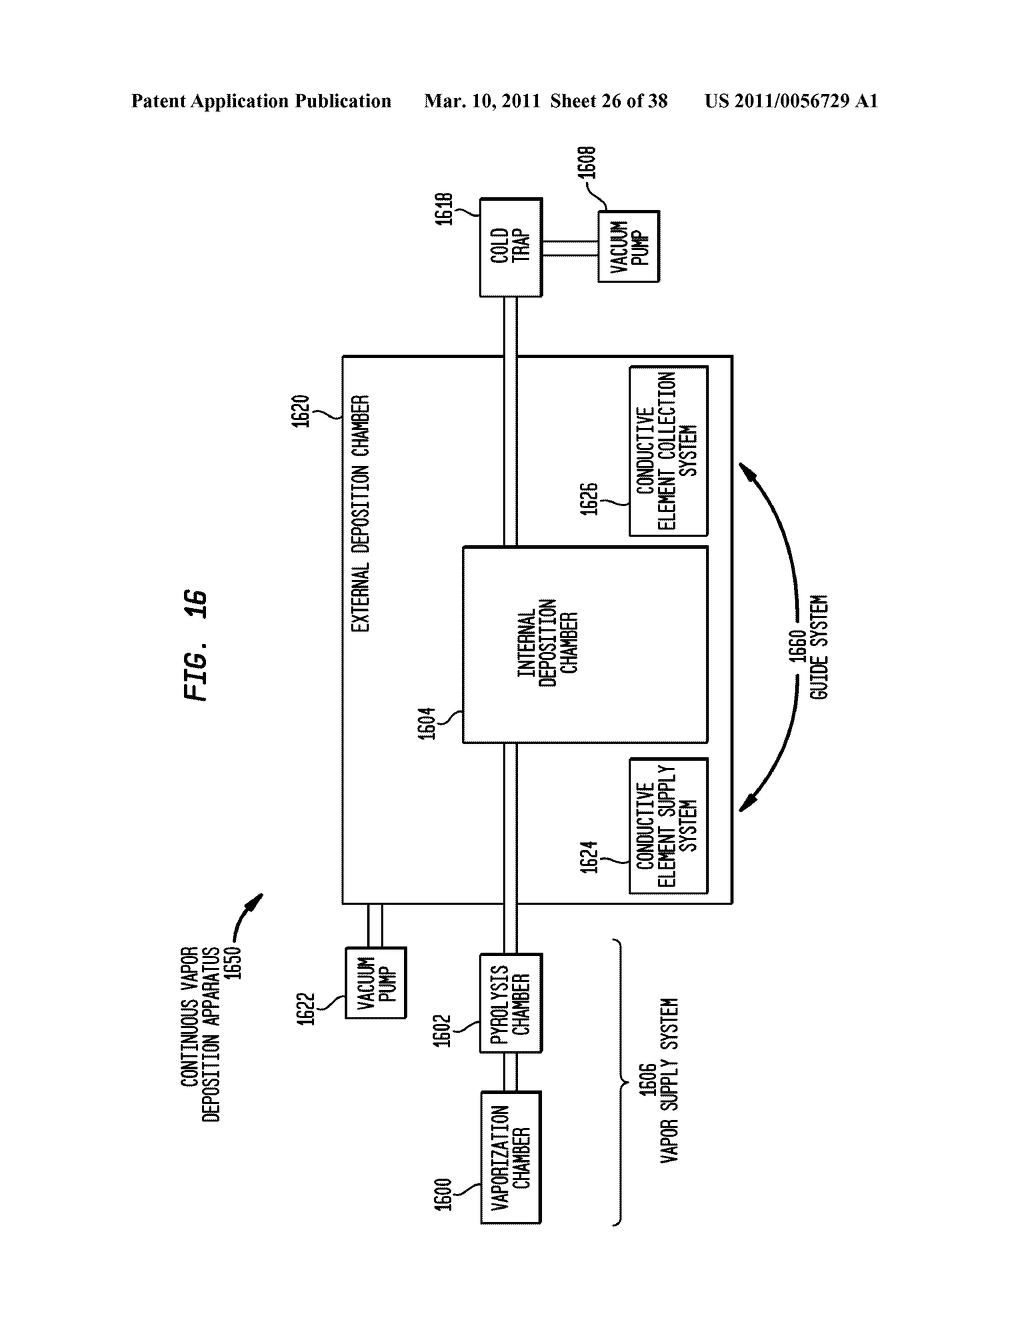 INSULATED CONDUCTIVE ELEMENT HAVING A SUBSTANTIALLY CONTINUOUS BARRIER LAYER FORMED THROUGH CONTINUOUS VAPOR DEPOSITION - diagram, schematic, and image 27